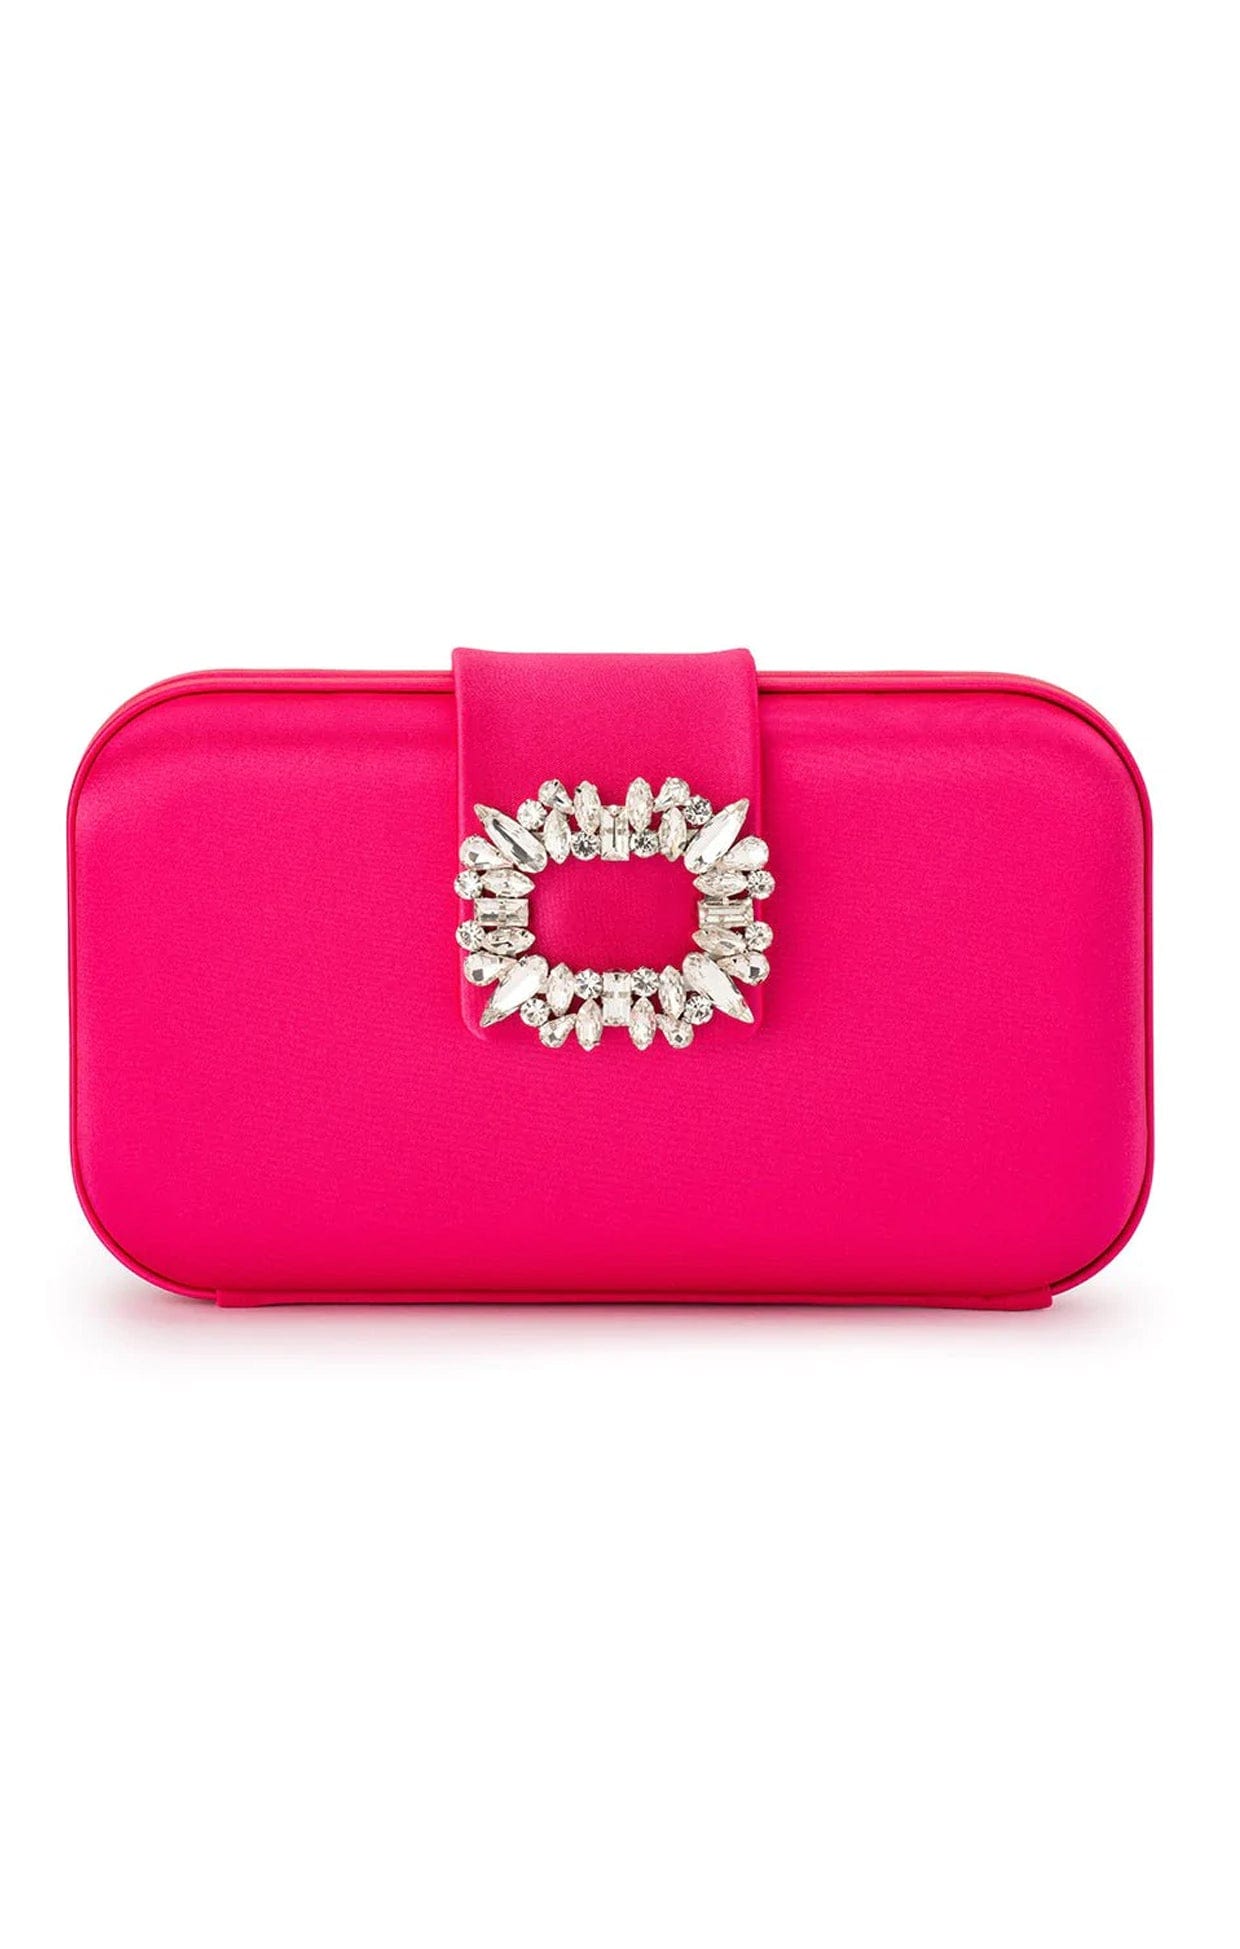 Zardozi Velvet Pink Embroidered Clutch Purse Bag With - Etsy